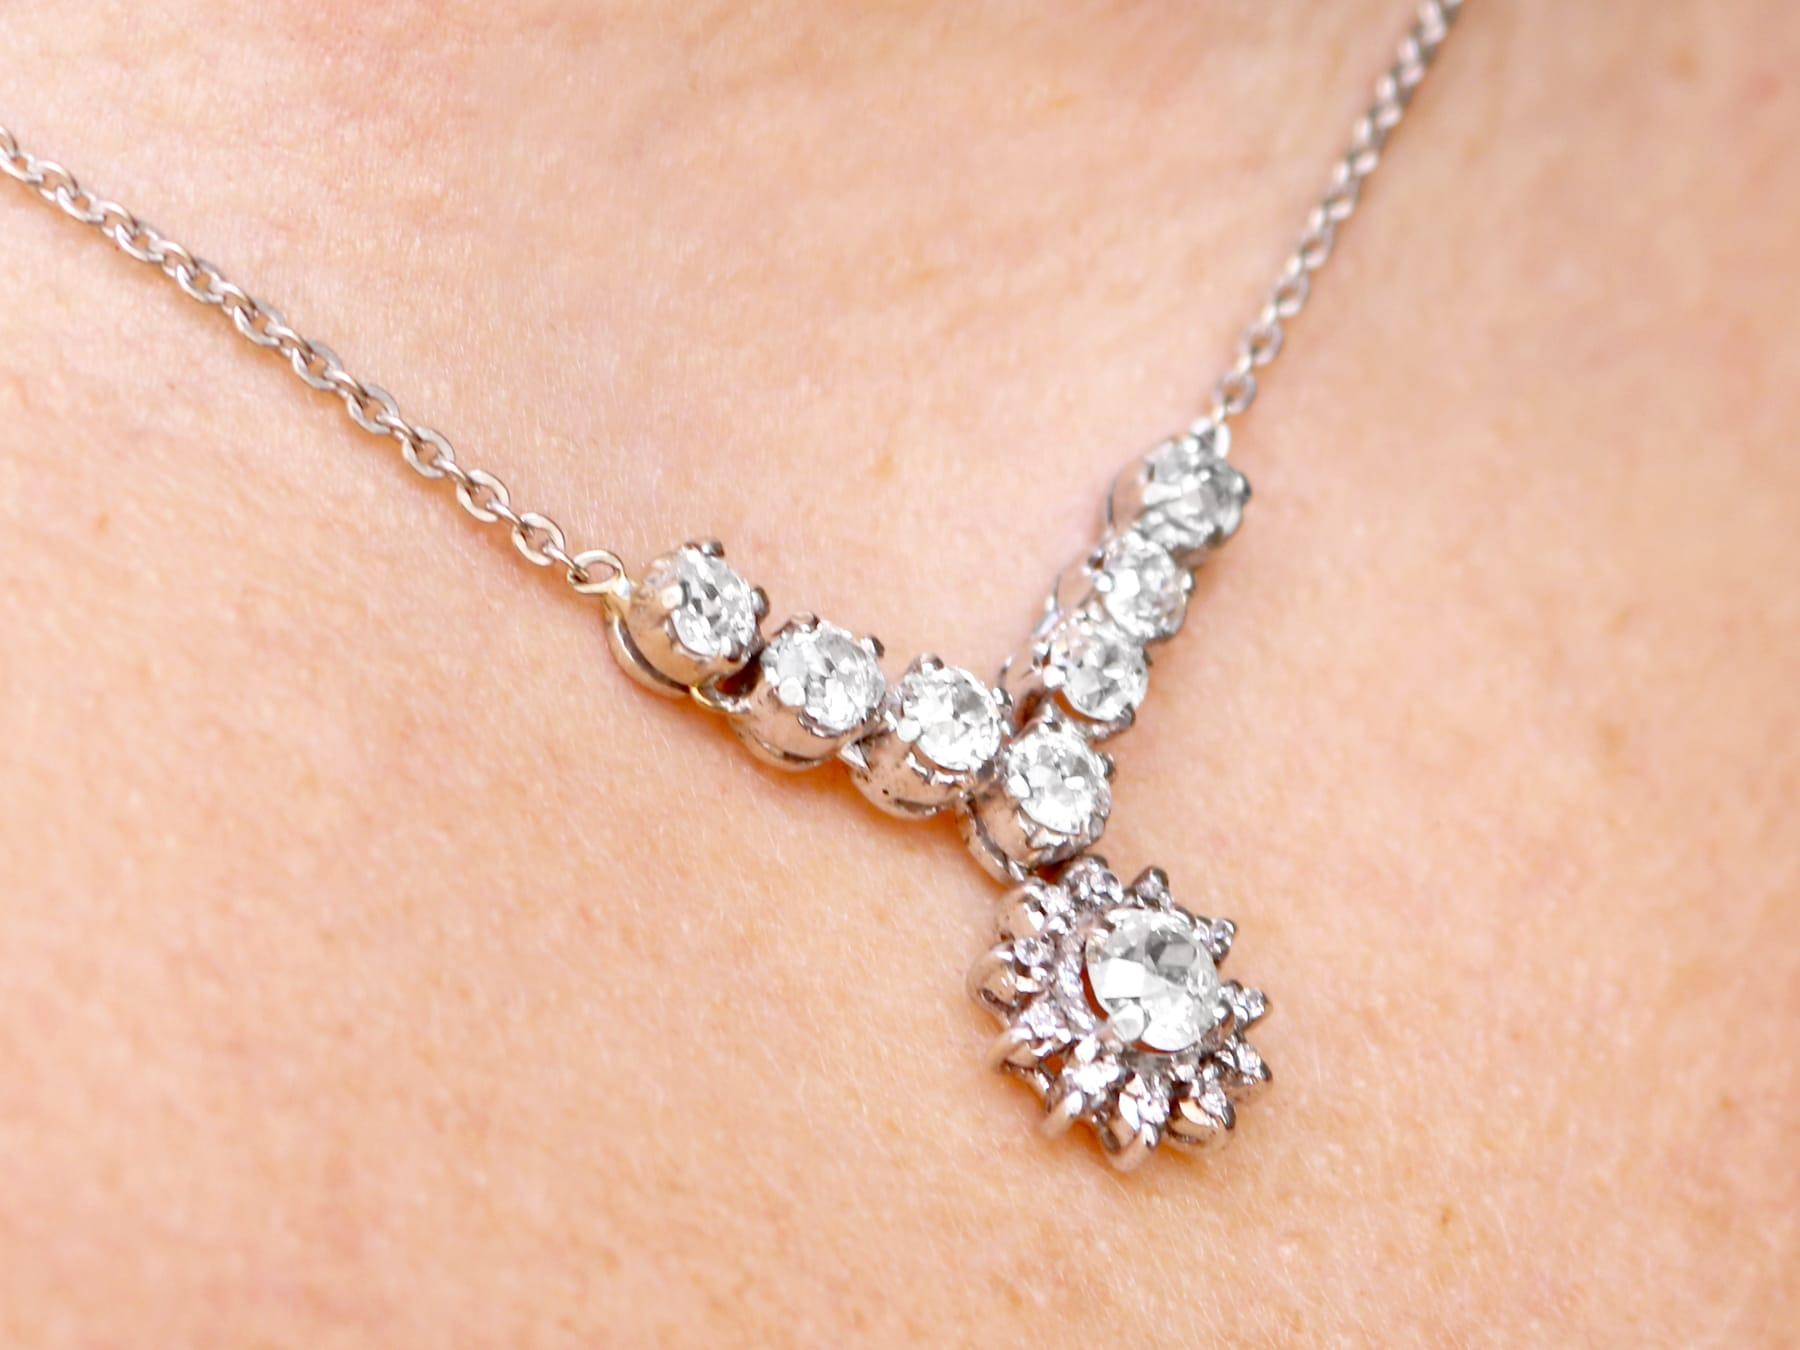 Women's Antique 1920s 1.99 Carat Diamond and Silver Necklace